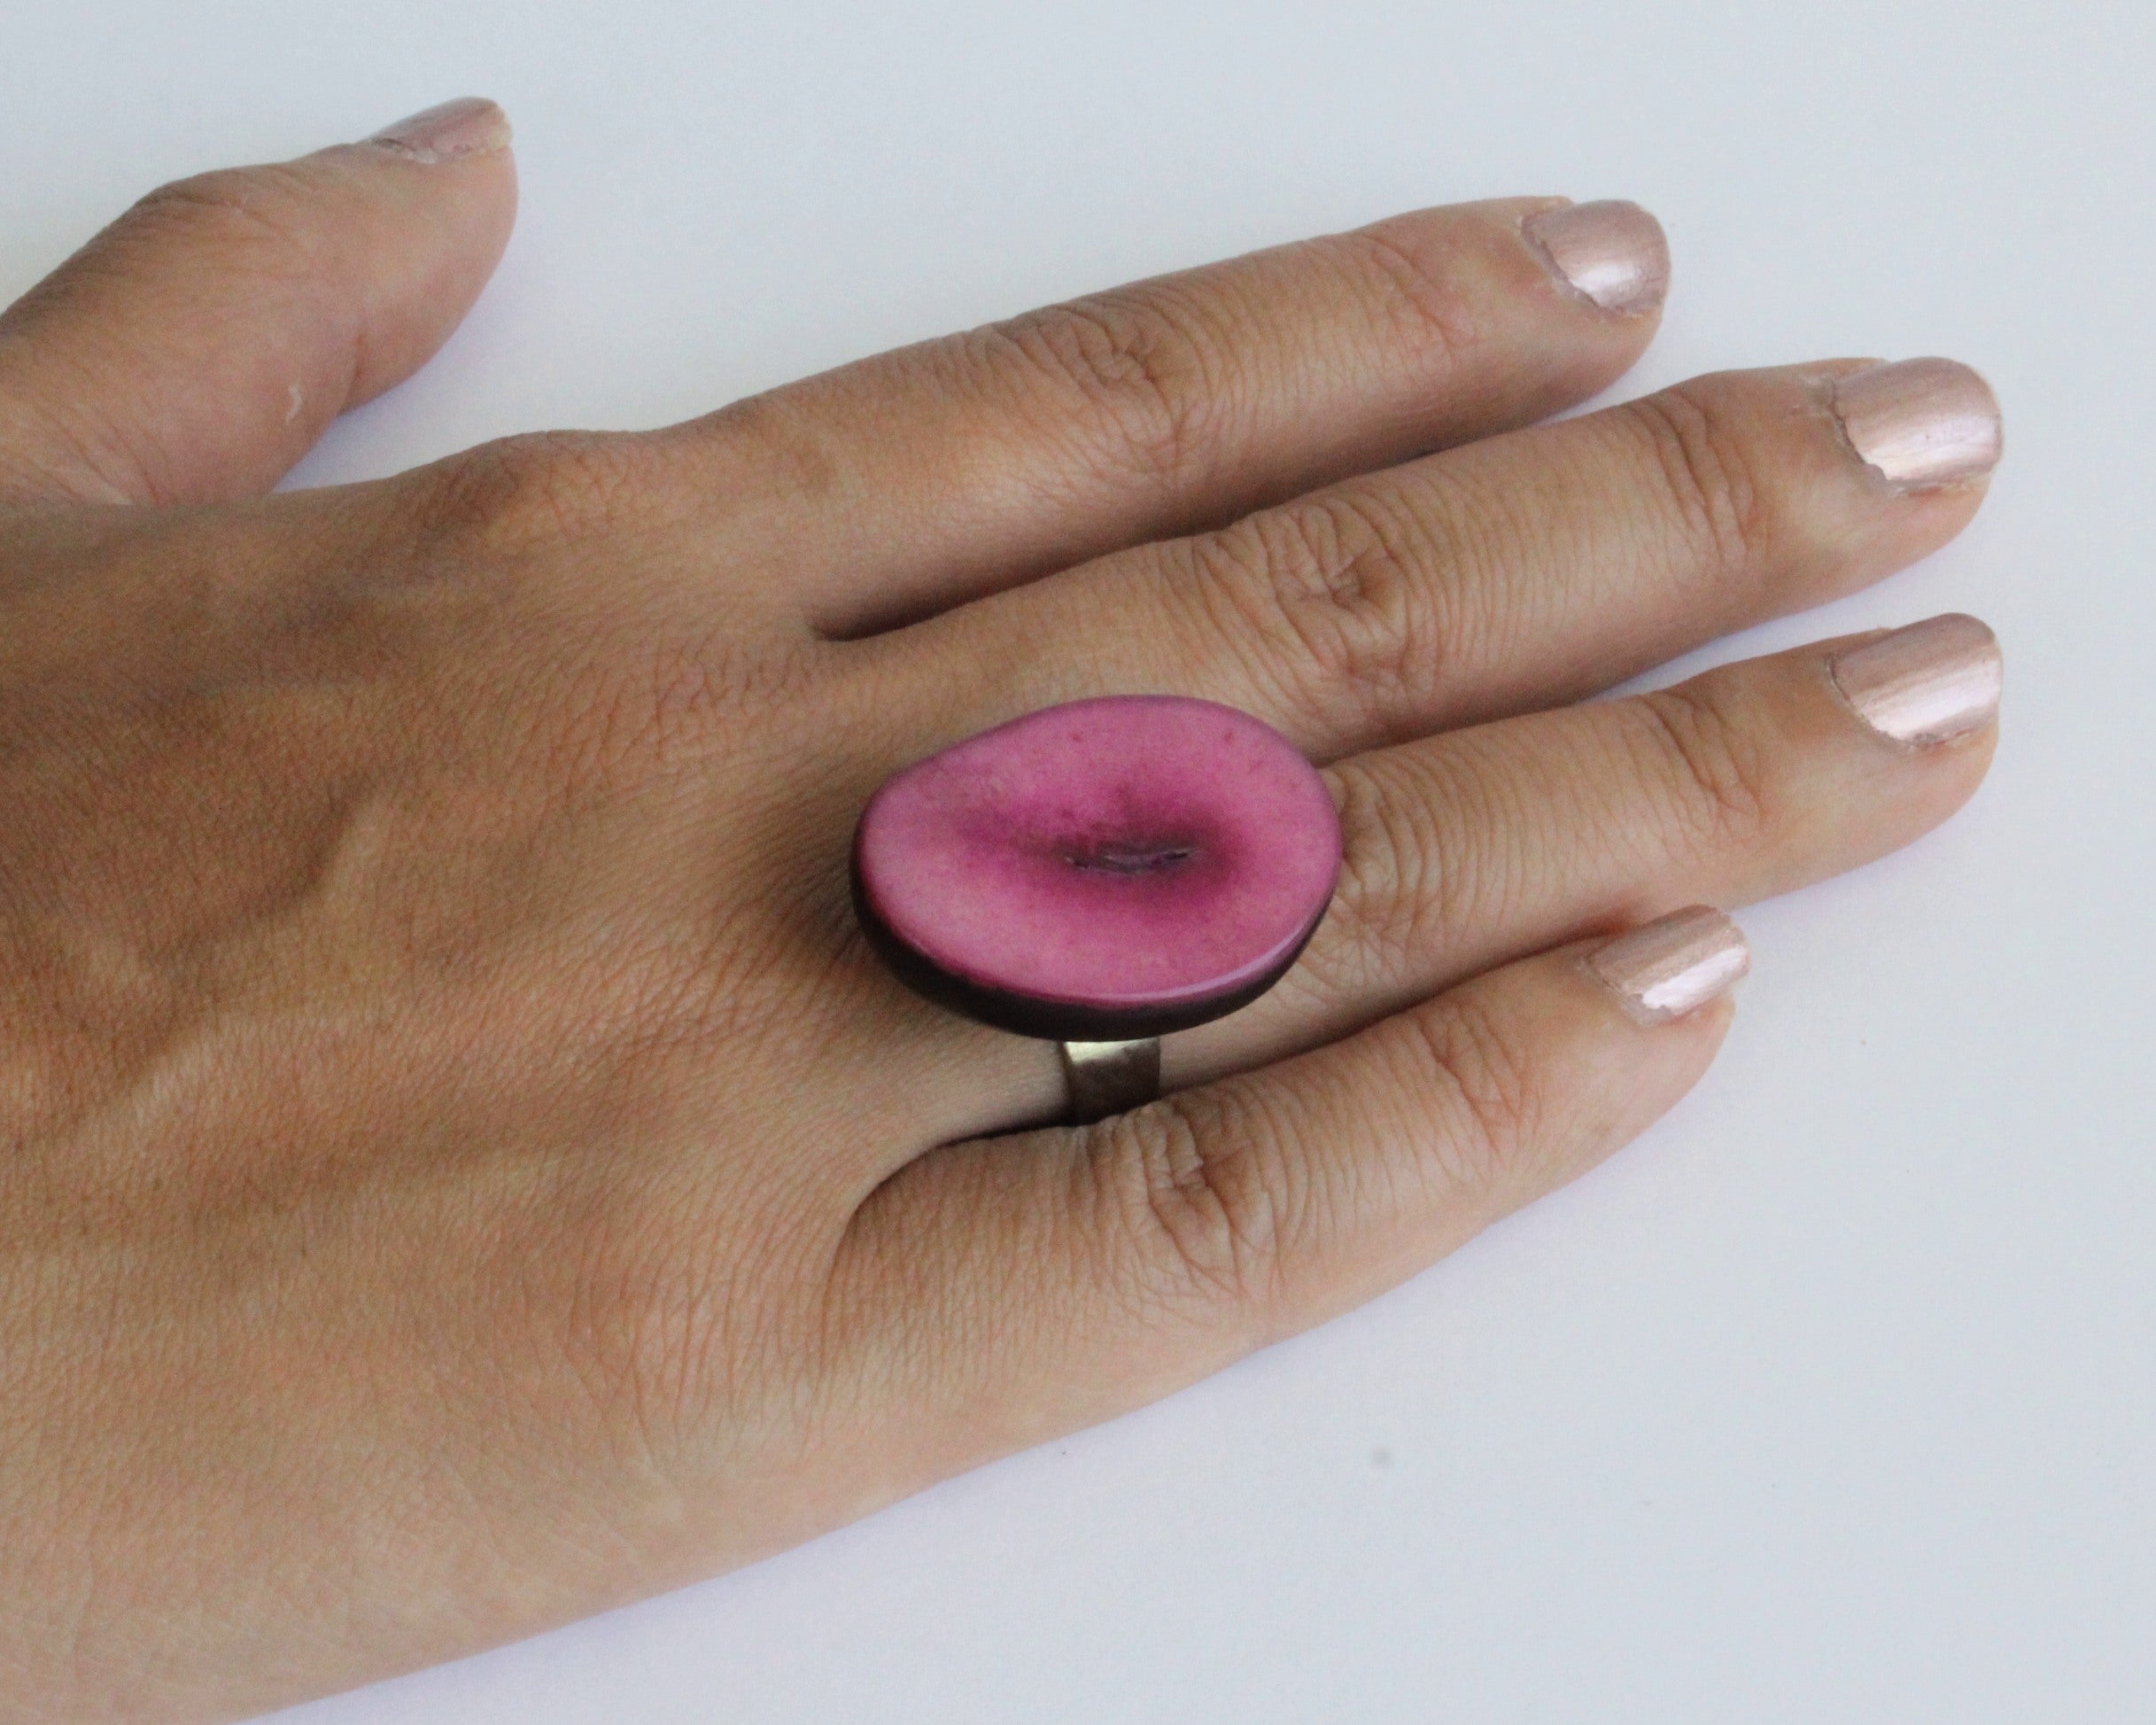 Handmade ring, tagua, pink, adjustable ring size, sustainable, ethical, hand